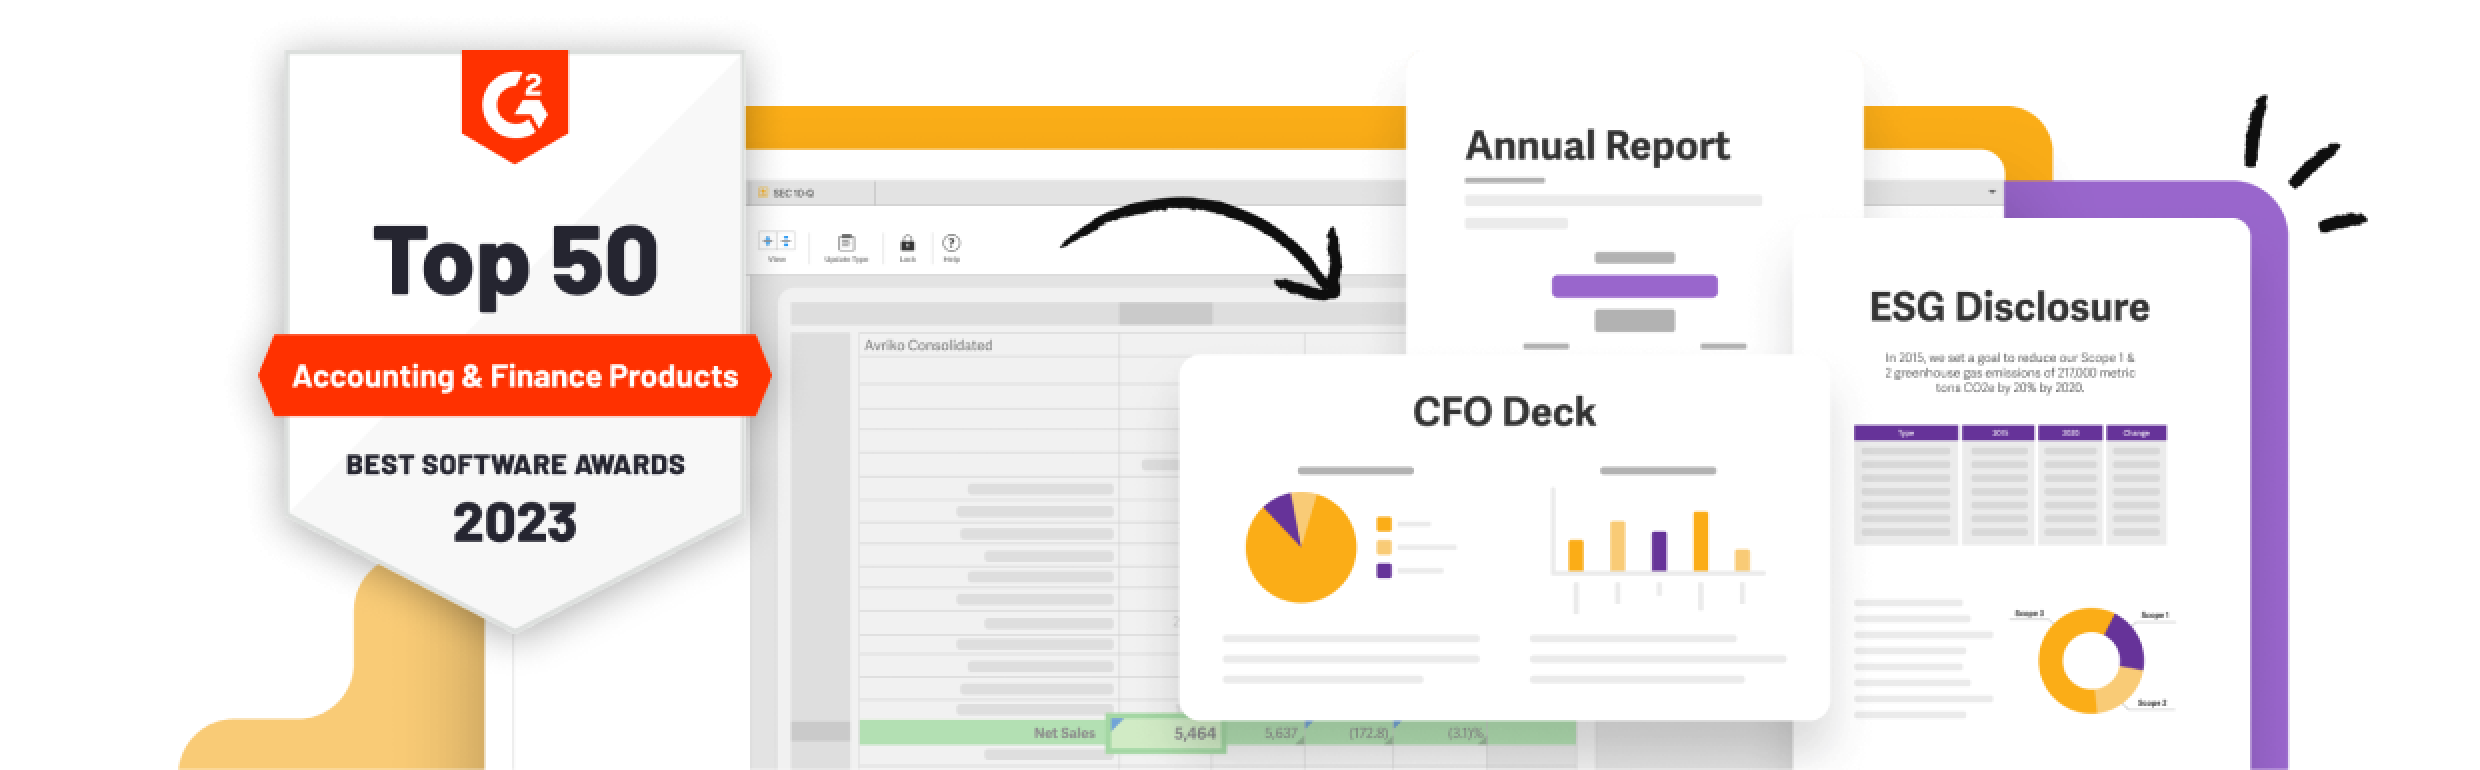 Dashboard depicting Annual Reporting, CFO Decks, and a badge with G2 recognition for Top 50 Accounting and Finance Products